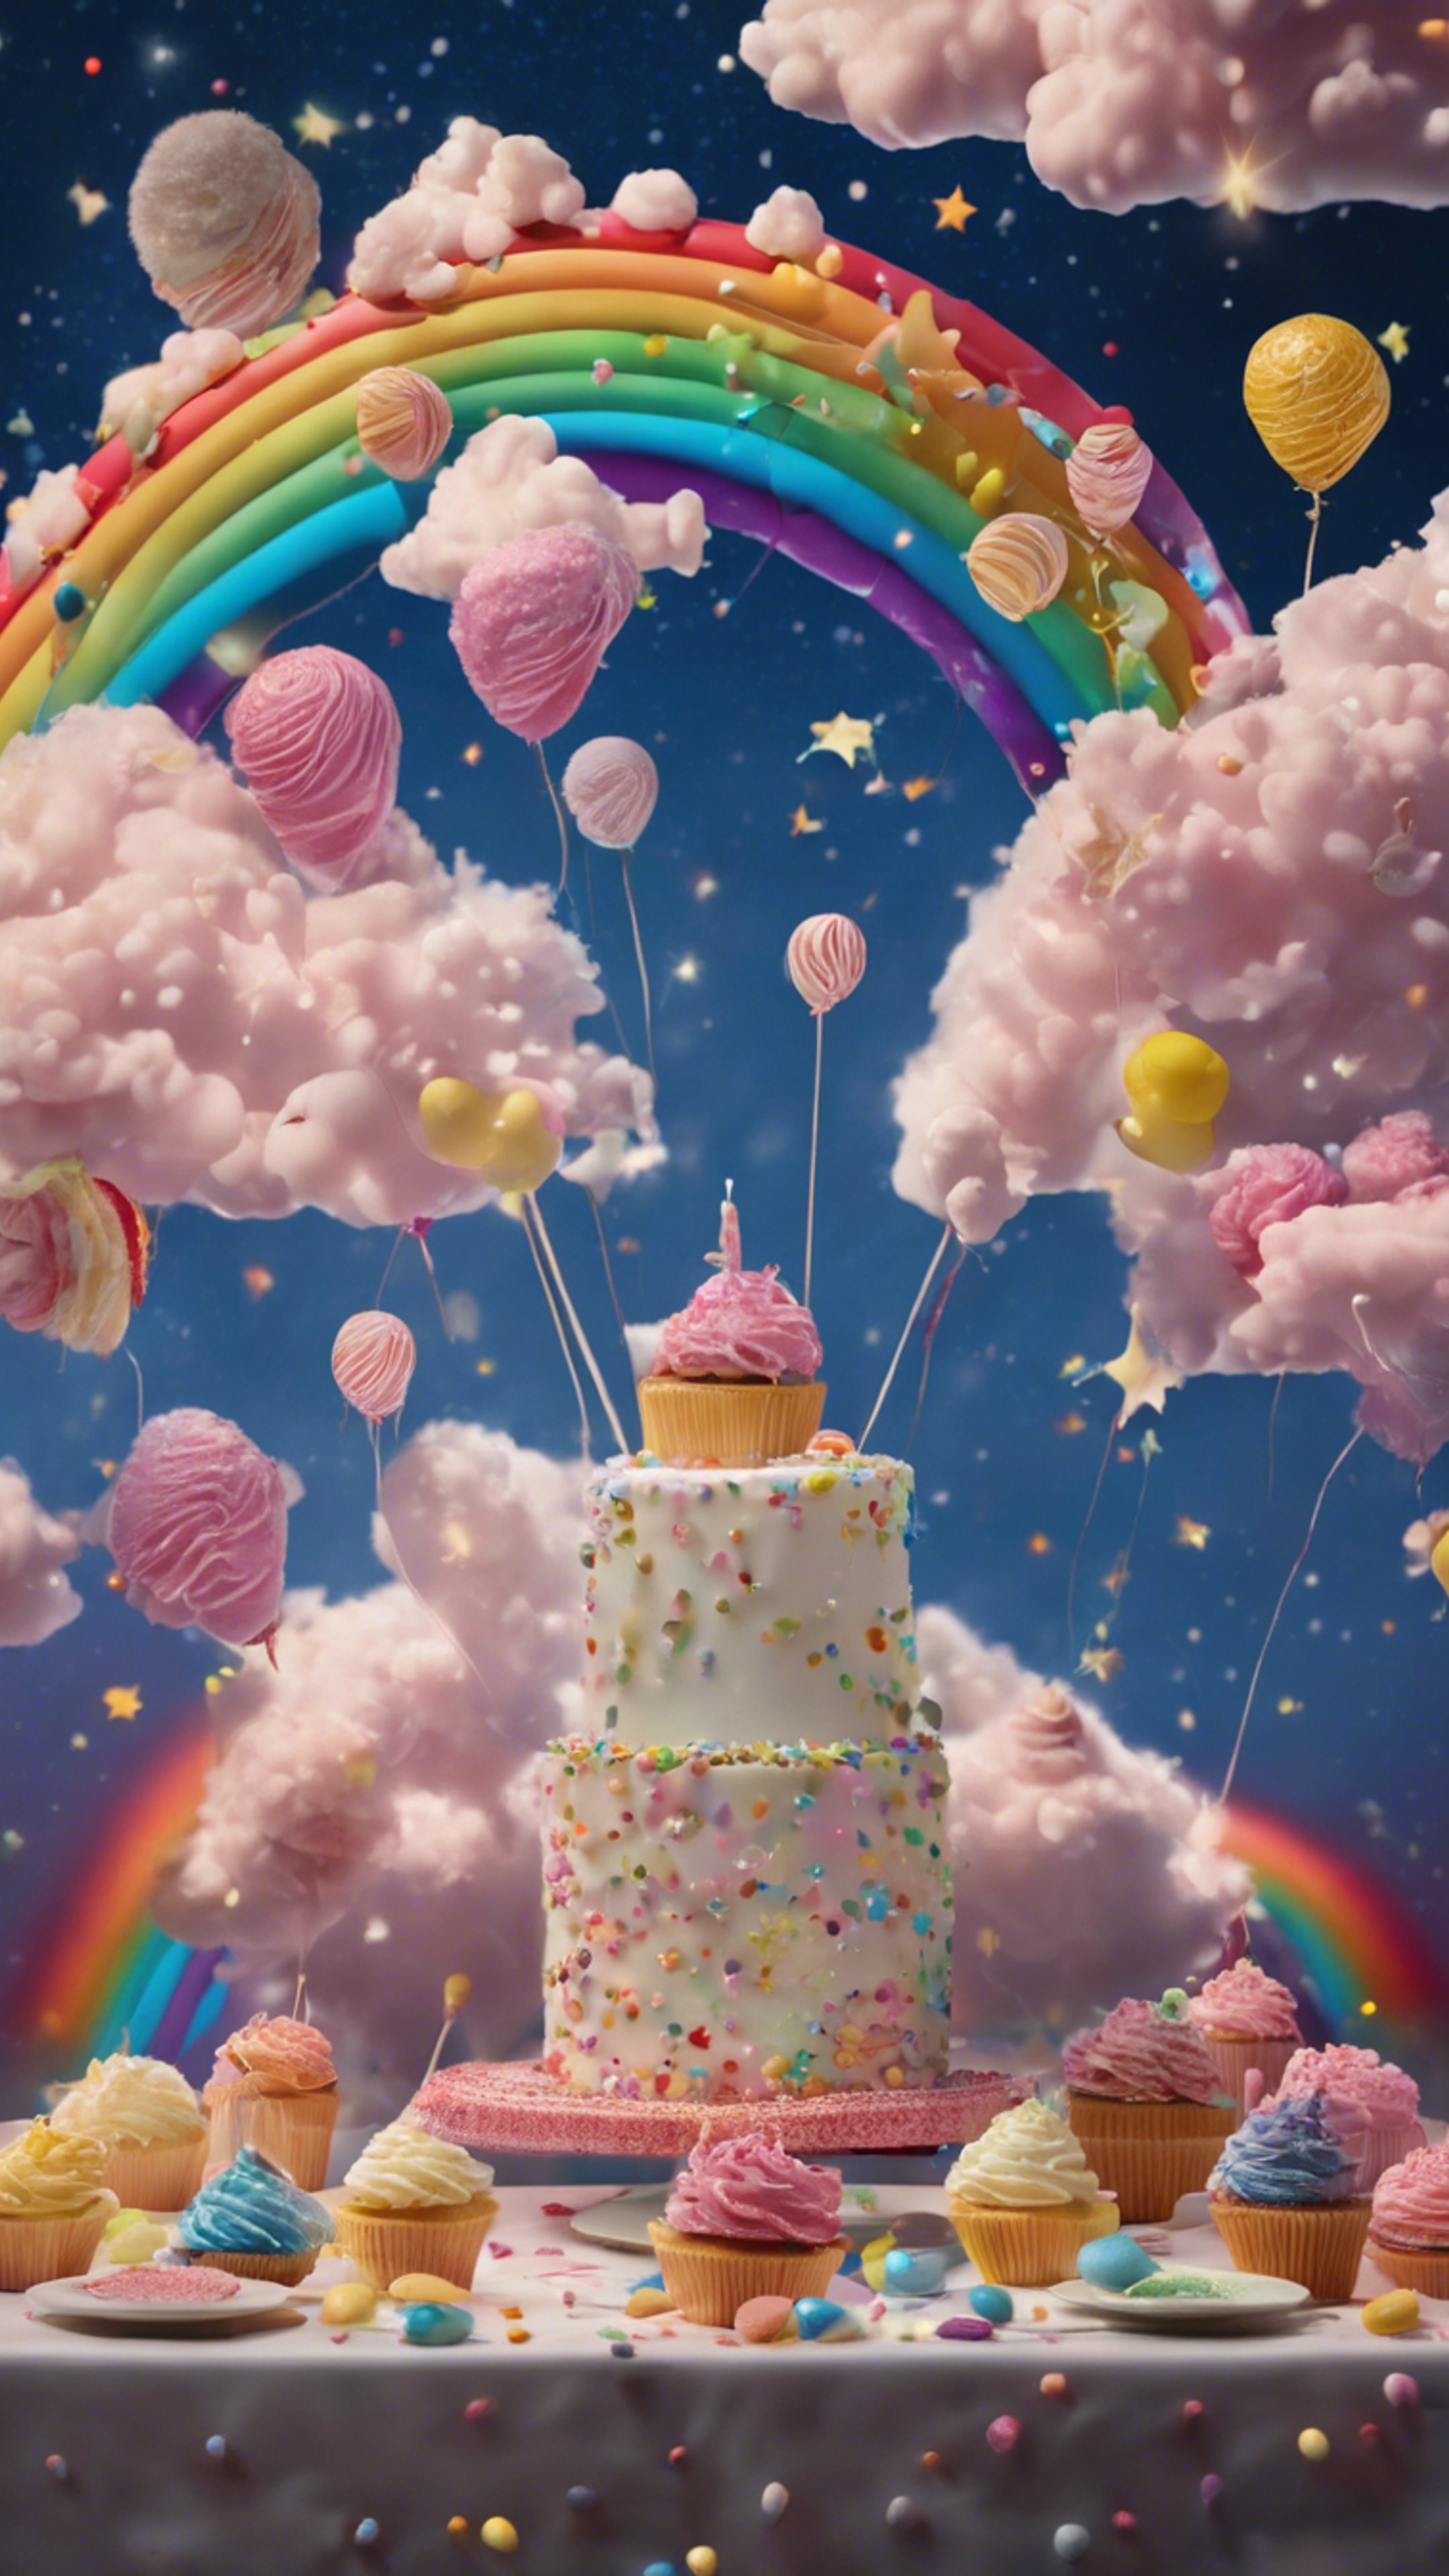 Surreal representation of a birthday party with floating cakes, candies amid fluffy clouds and rainbows discordantly juxtaposed against a starry night sky. Ταπετσαρία[7f18c2fd7760424e83fc]